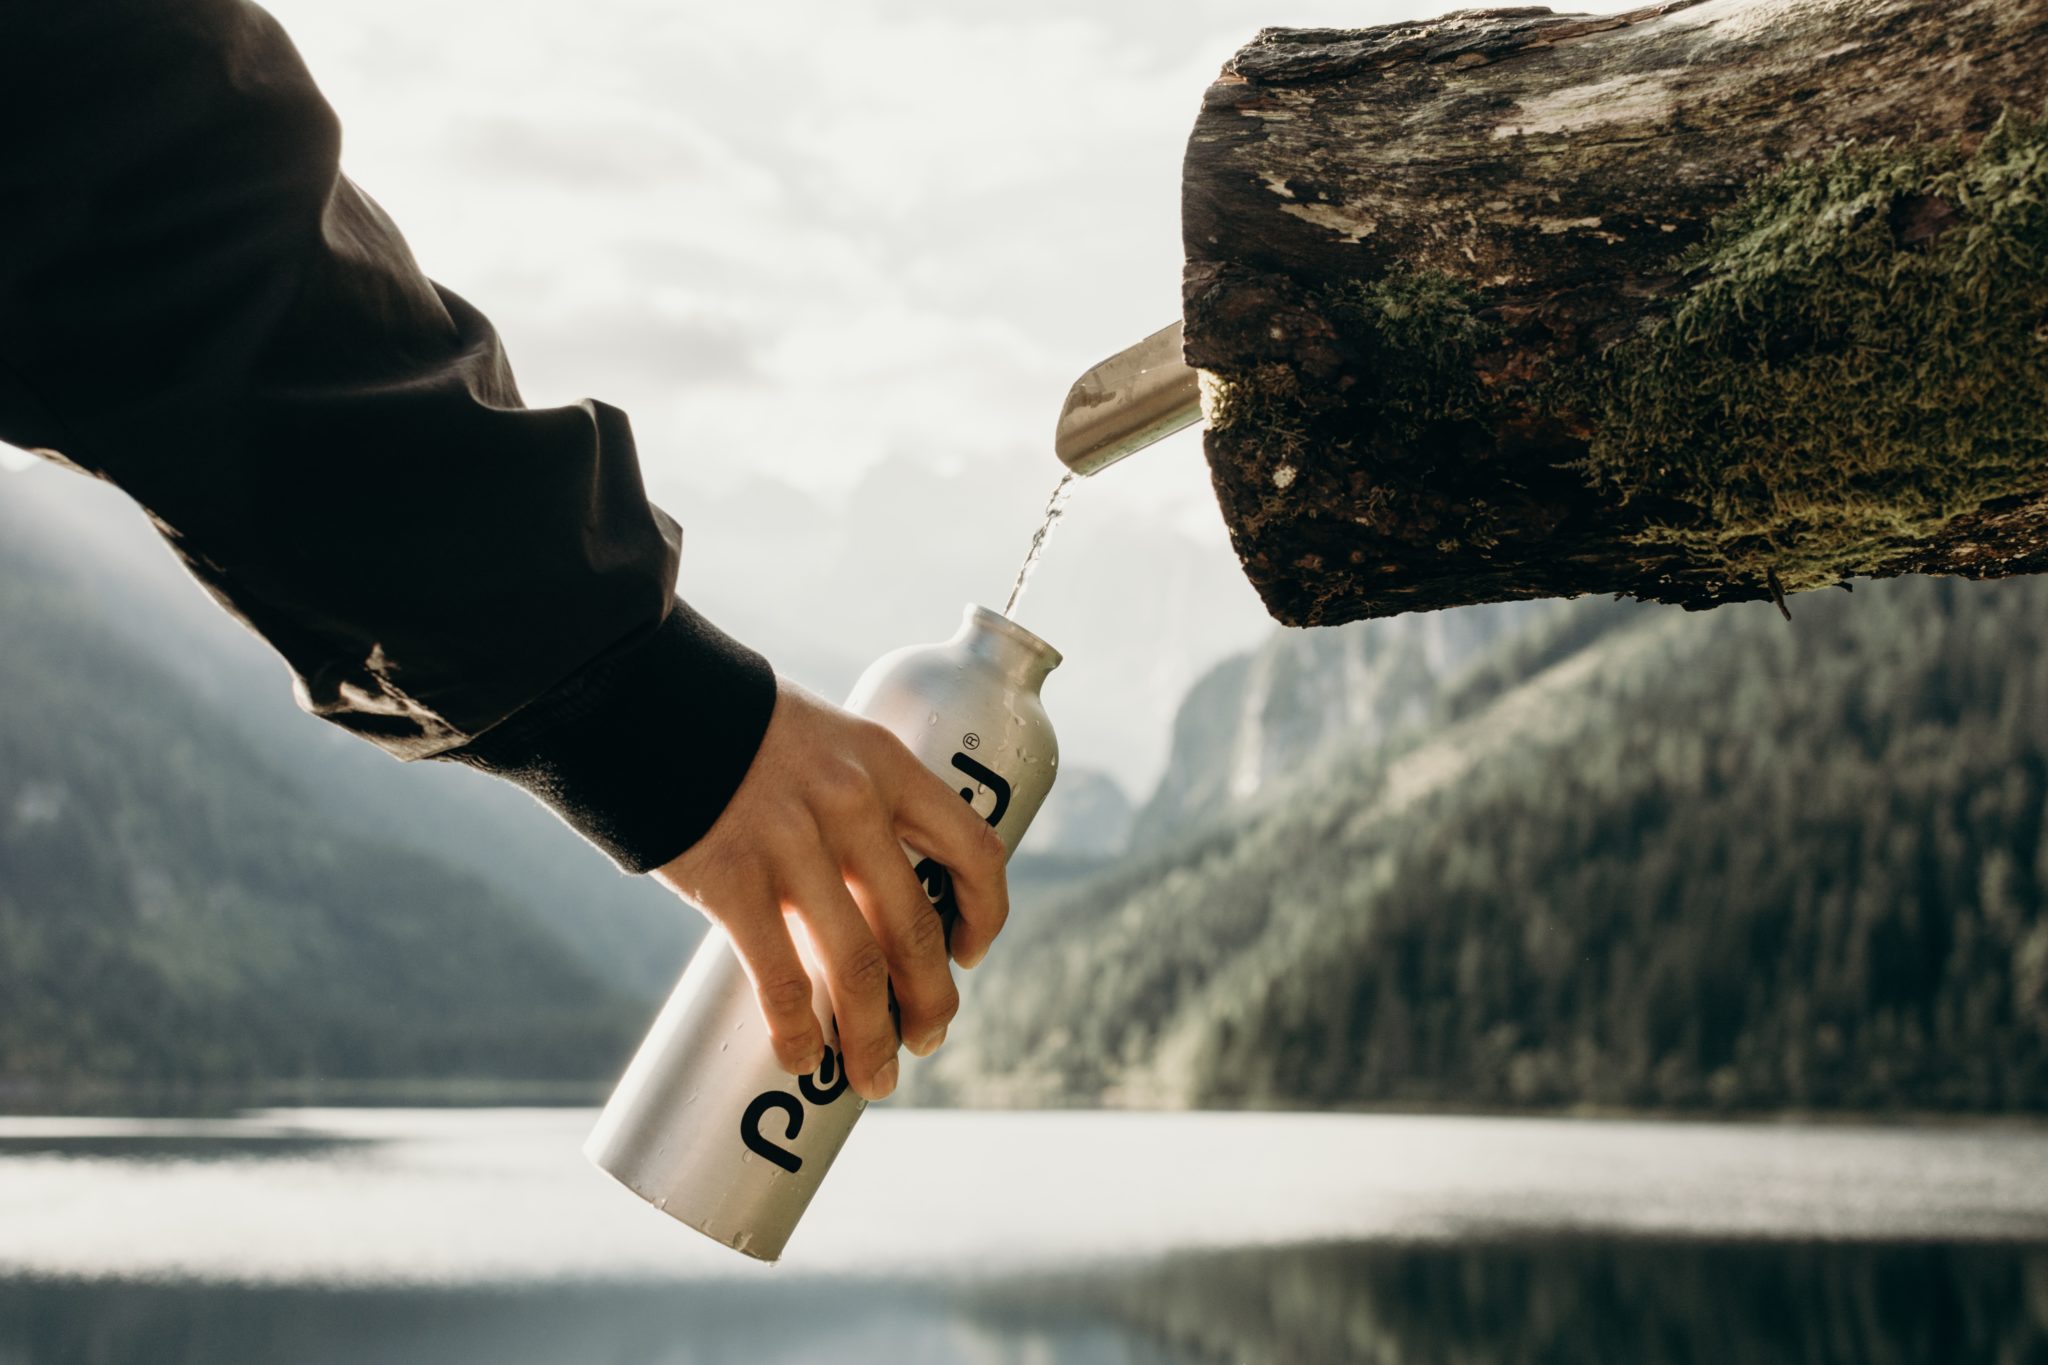 A spout sticking out of a tree pouring filter water into a reusable water bottle.